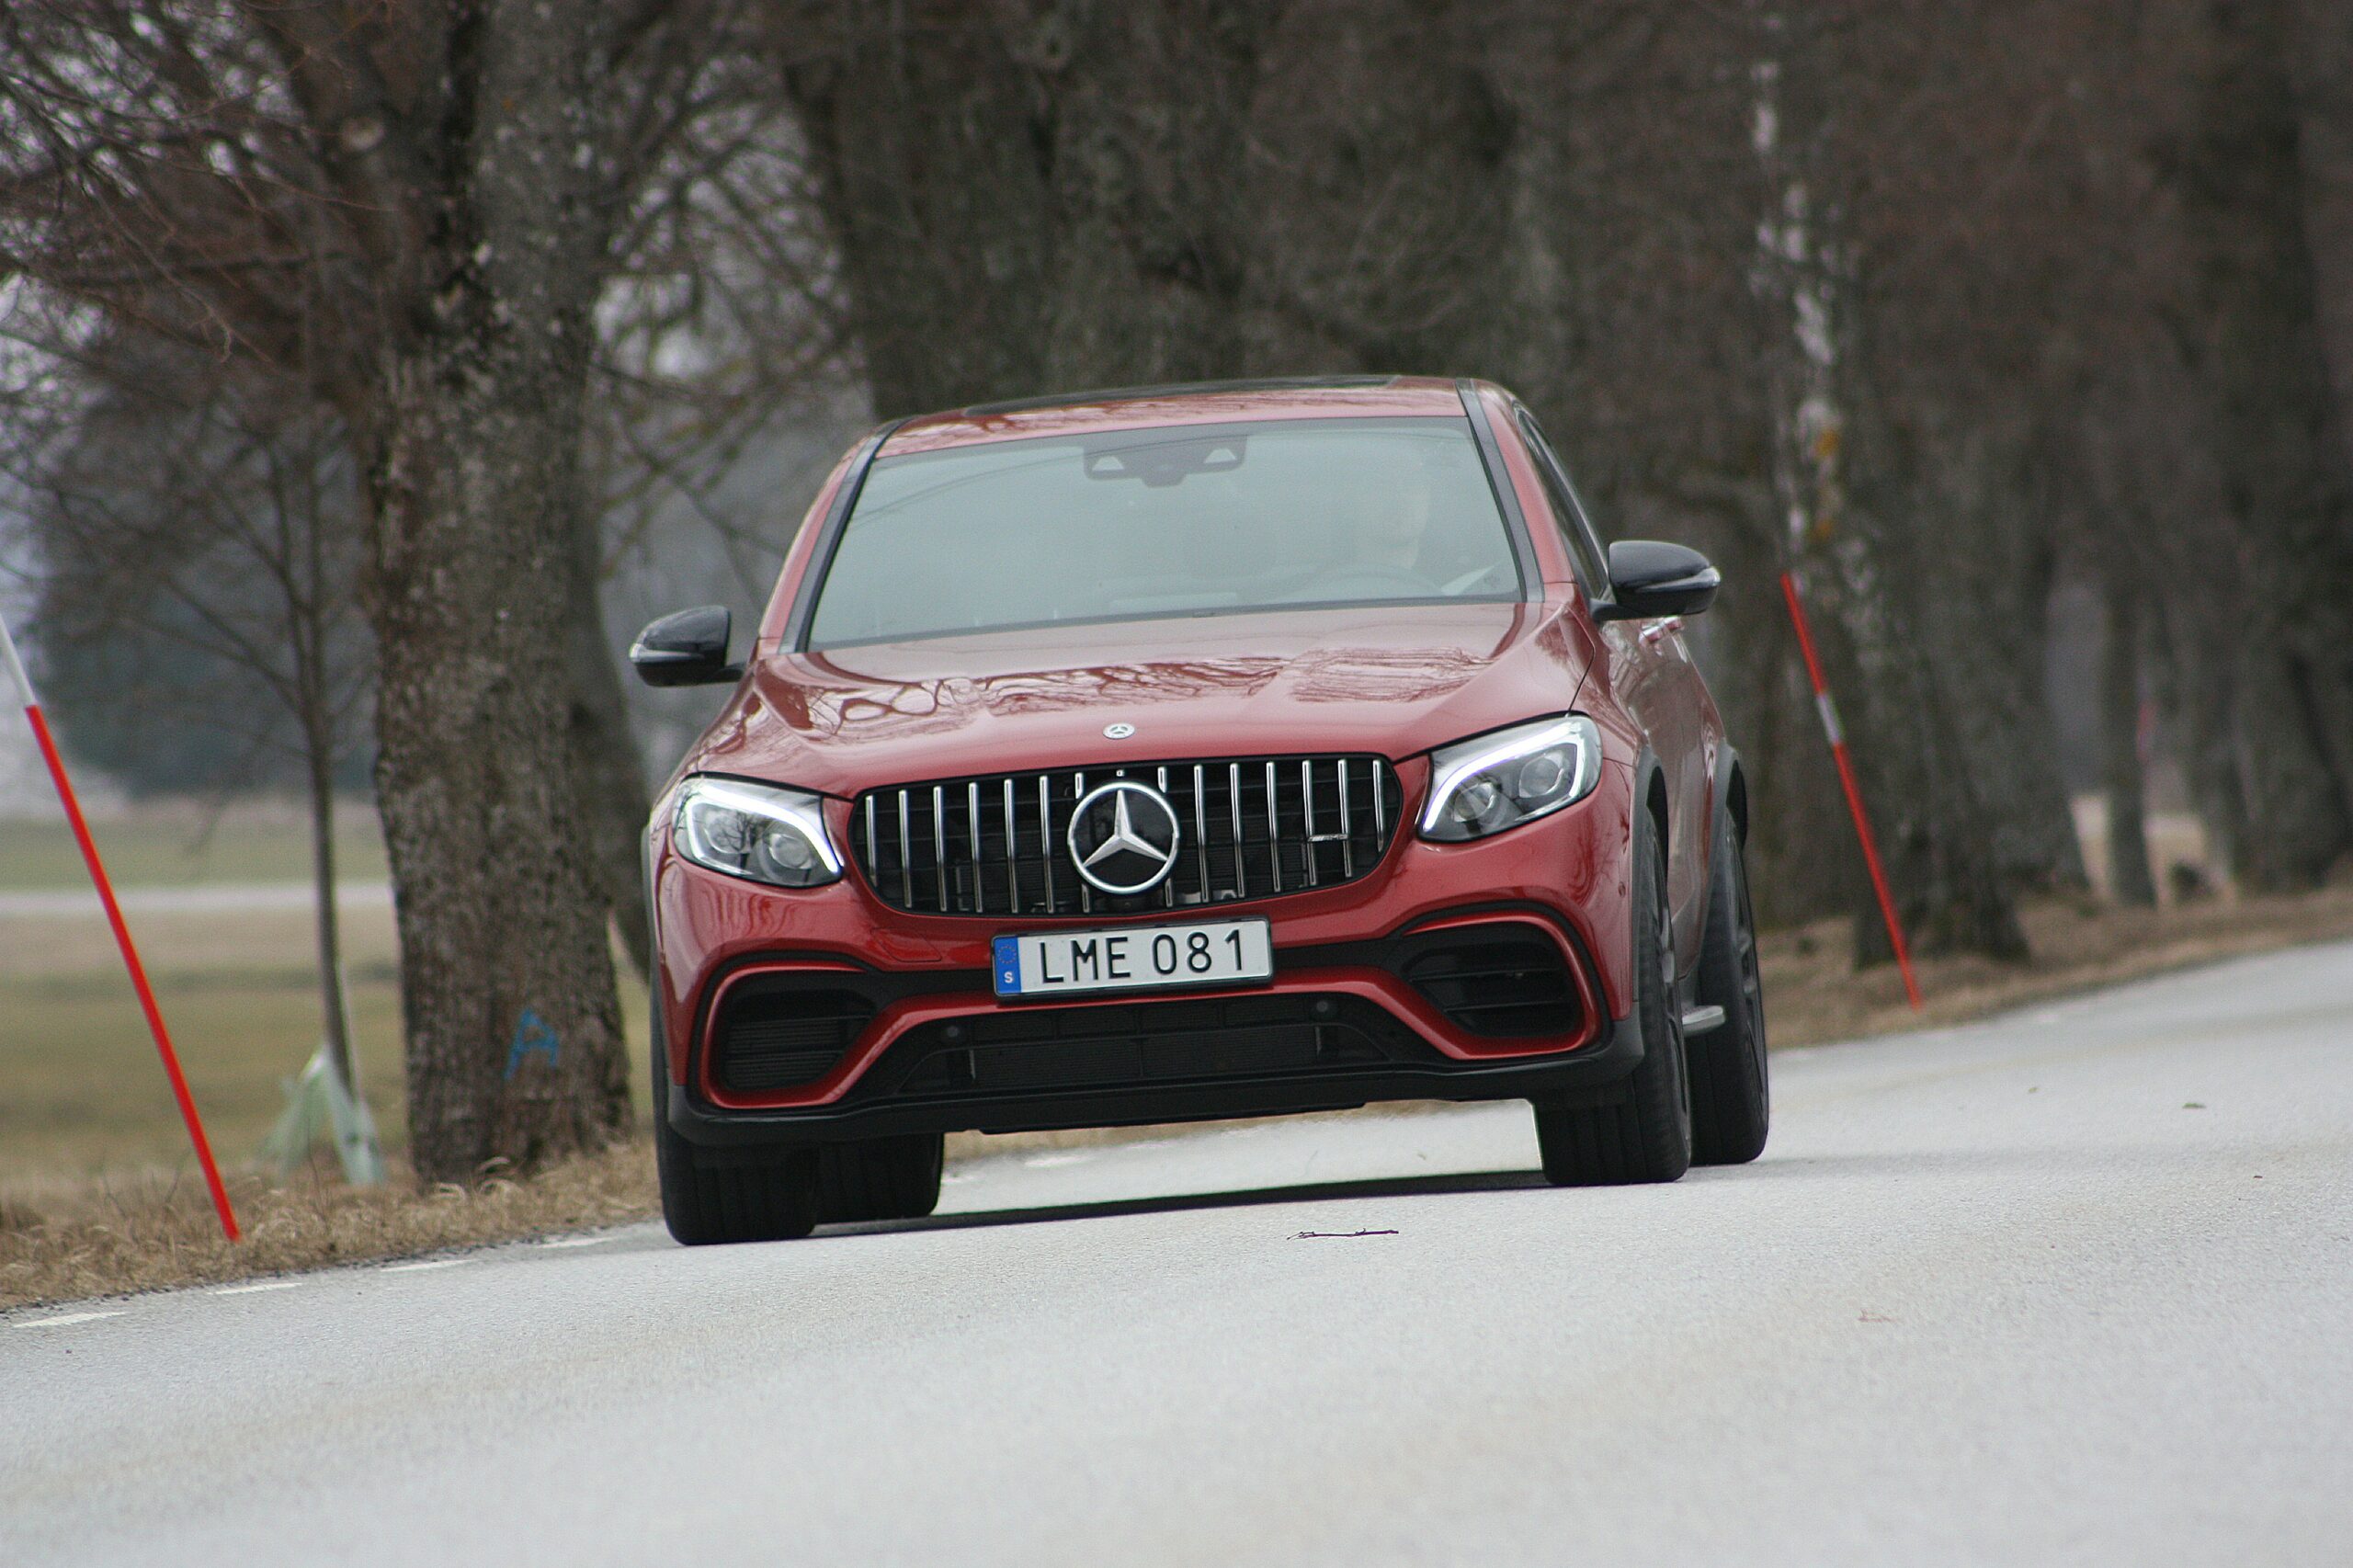 Read more about the article The Mercedes-Benz GLC: A Luxury SUV with Style, Performance, and Safety